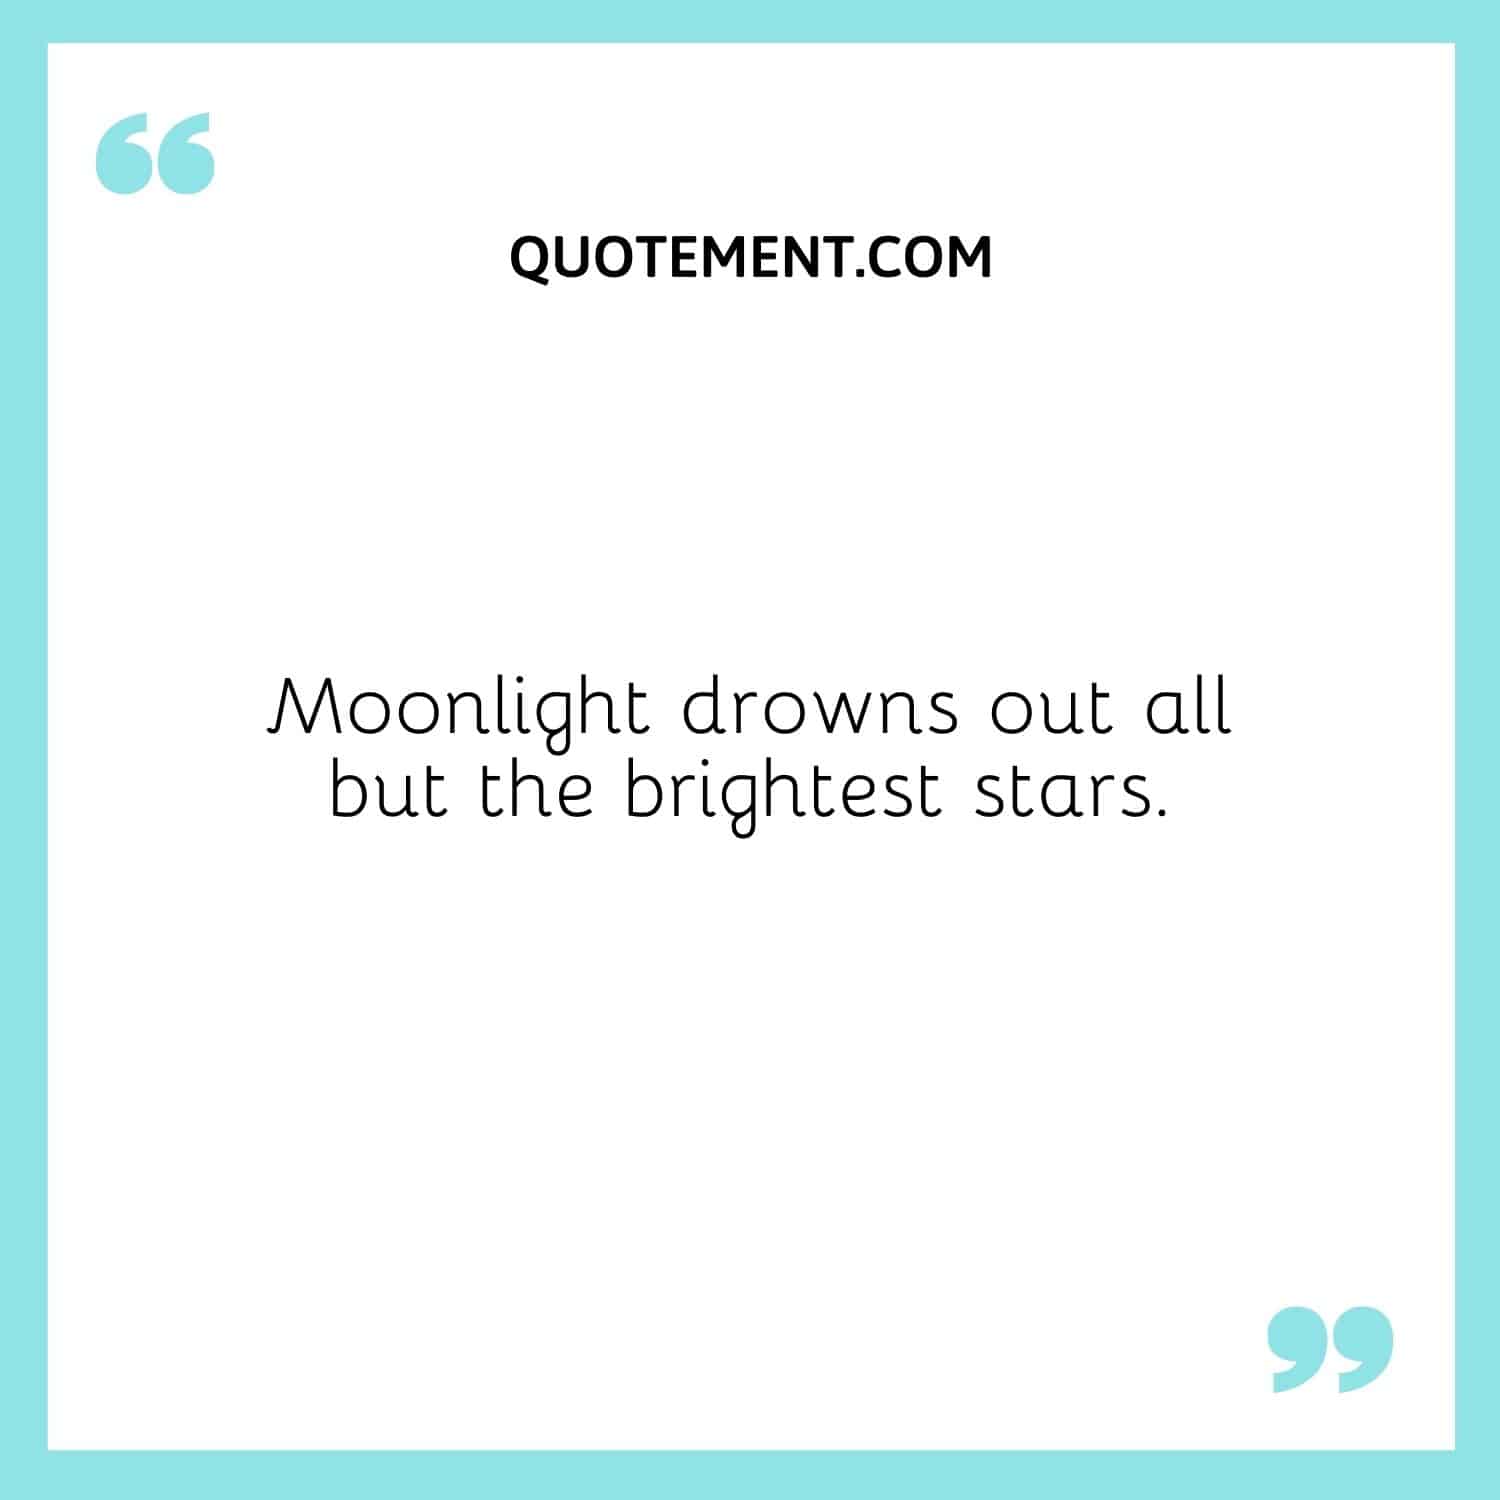 Moonlight drowns out all but the brightest stars.